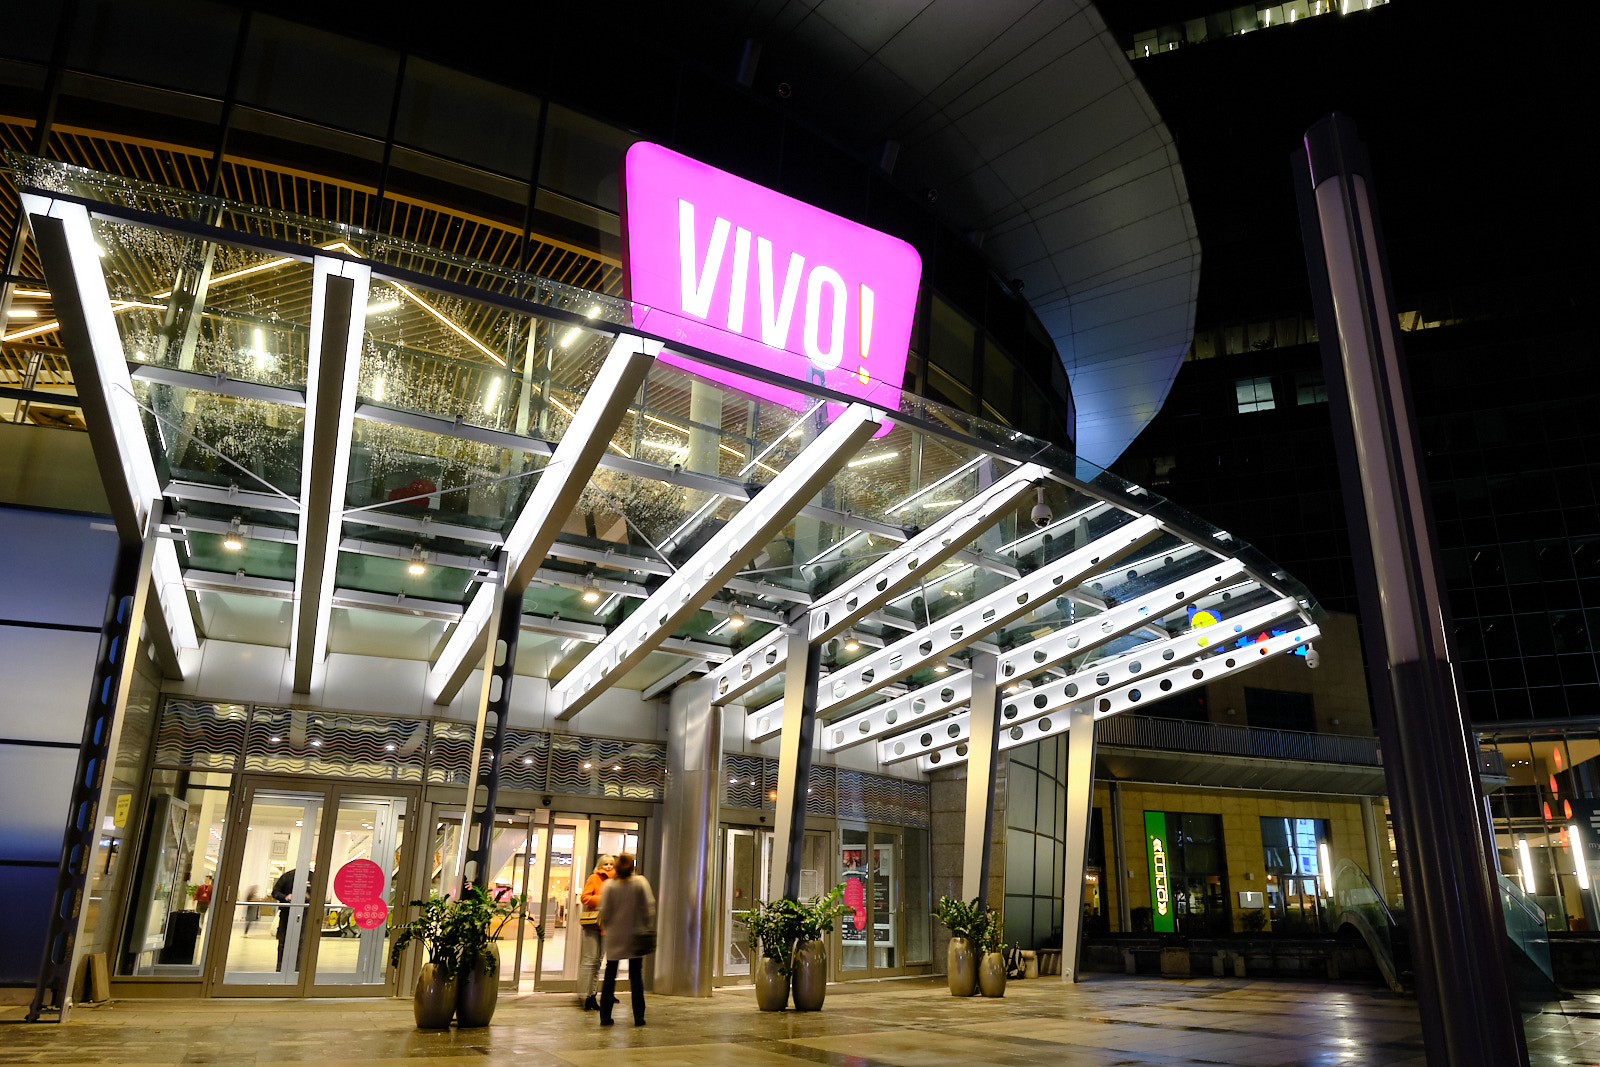 Design and supply of LED luminaires for the awning of the main entrance of the VIVO! shopping center